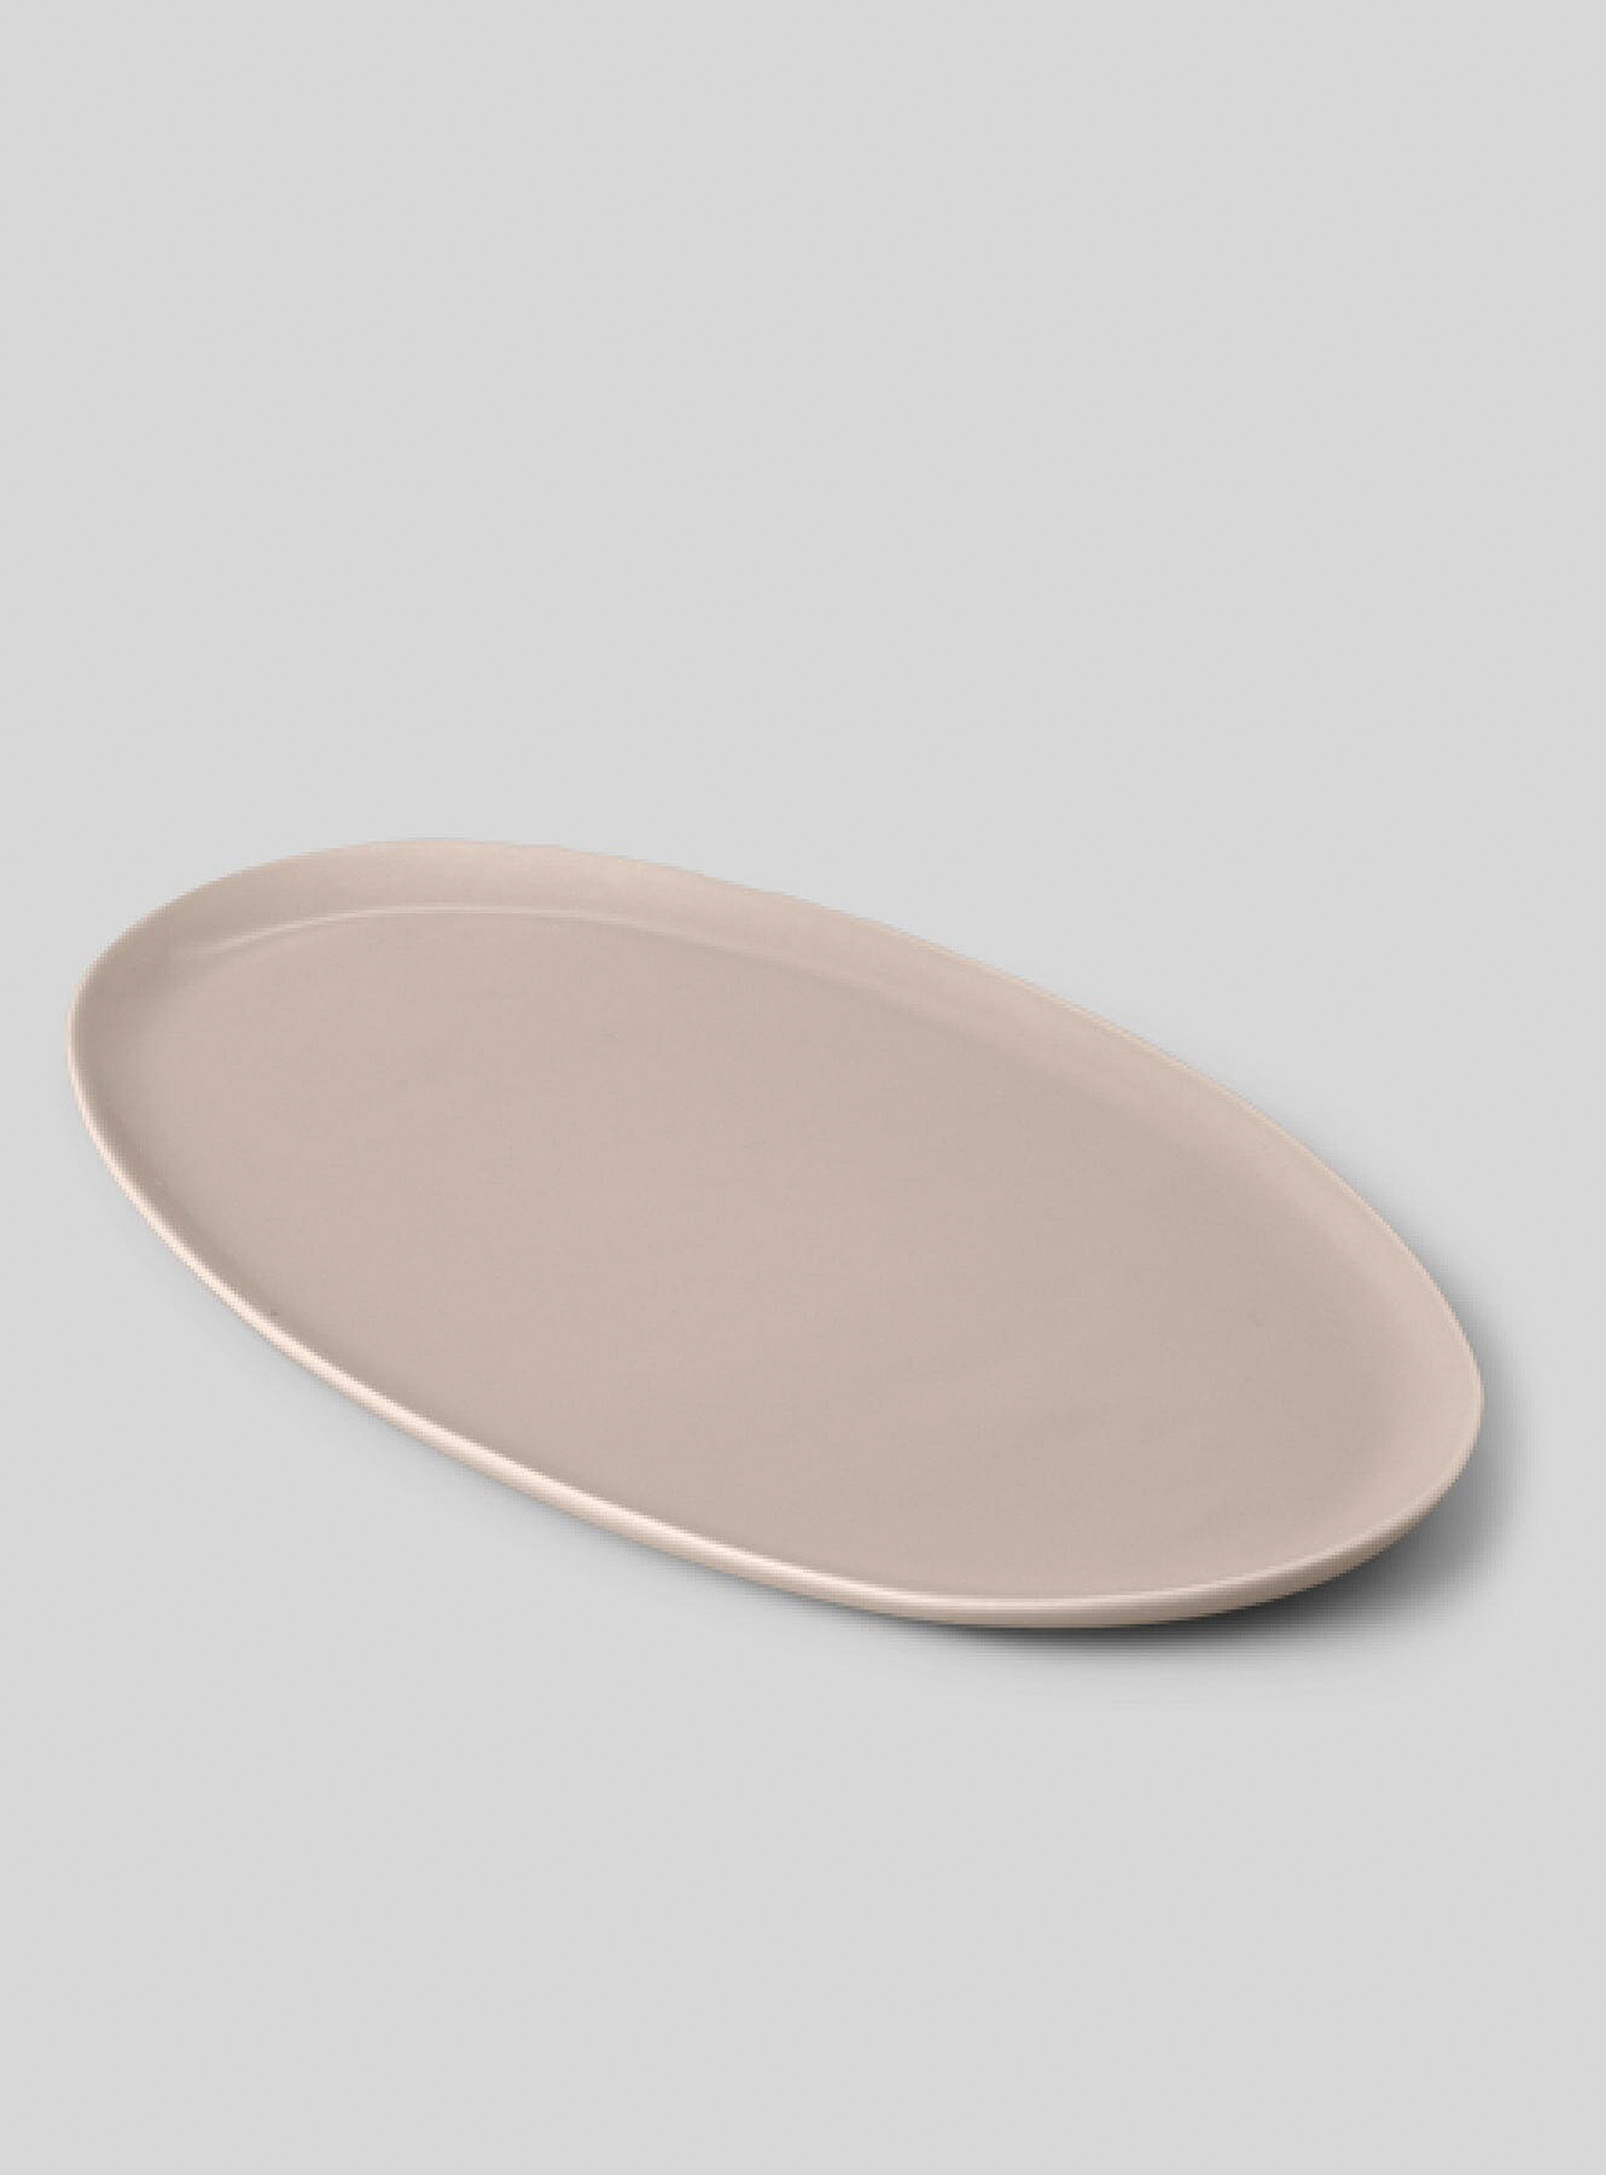 Fable Oval Stoneware Serving Tray In Neutral